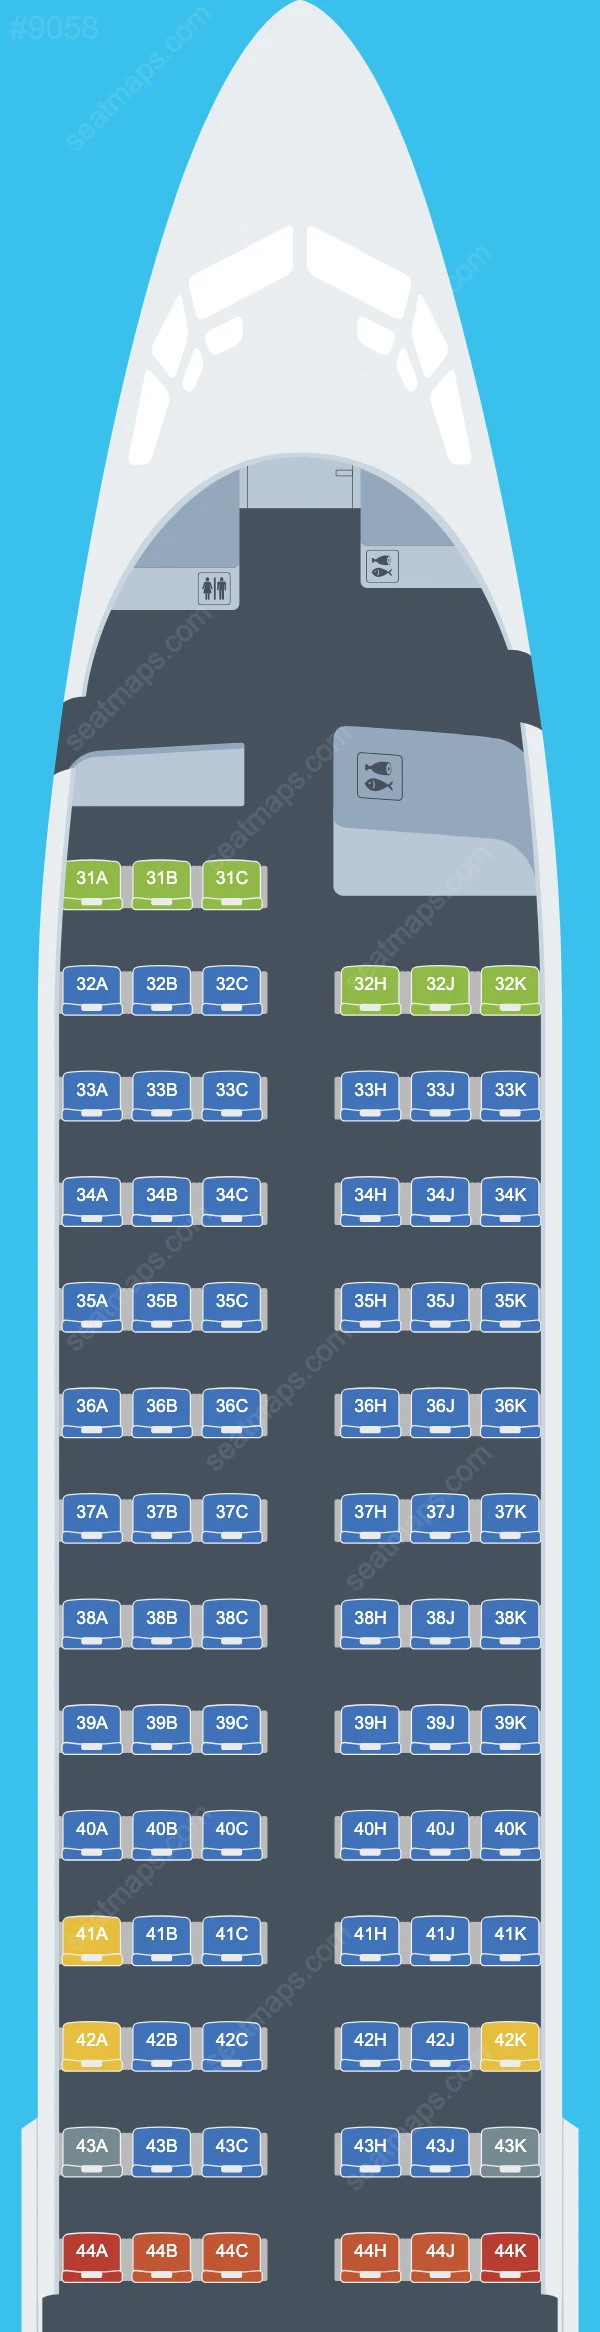 Hainan Airlines Boeing 737 Seat Maps 737-800 V.3